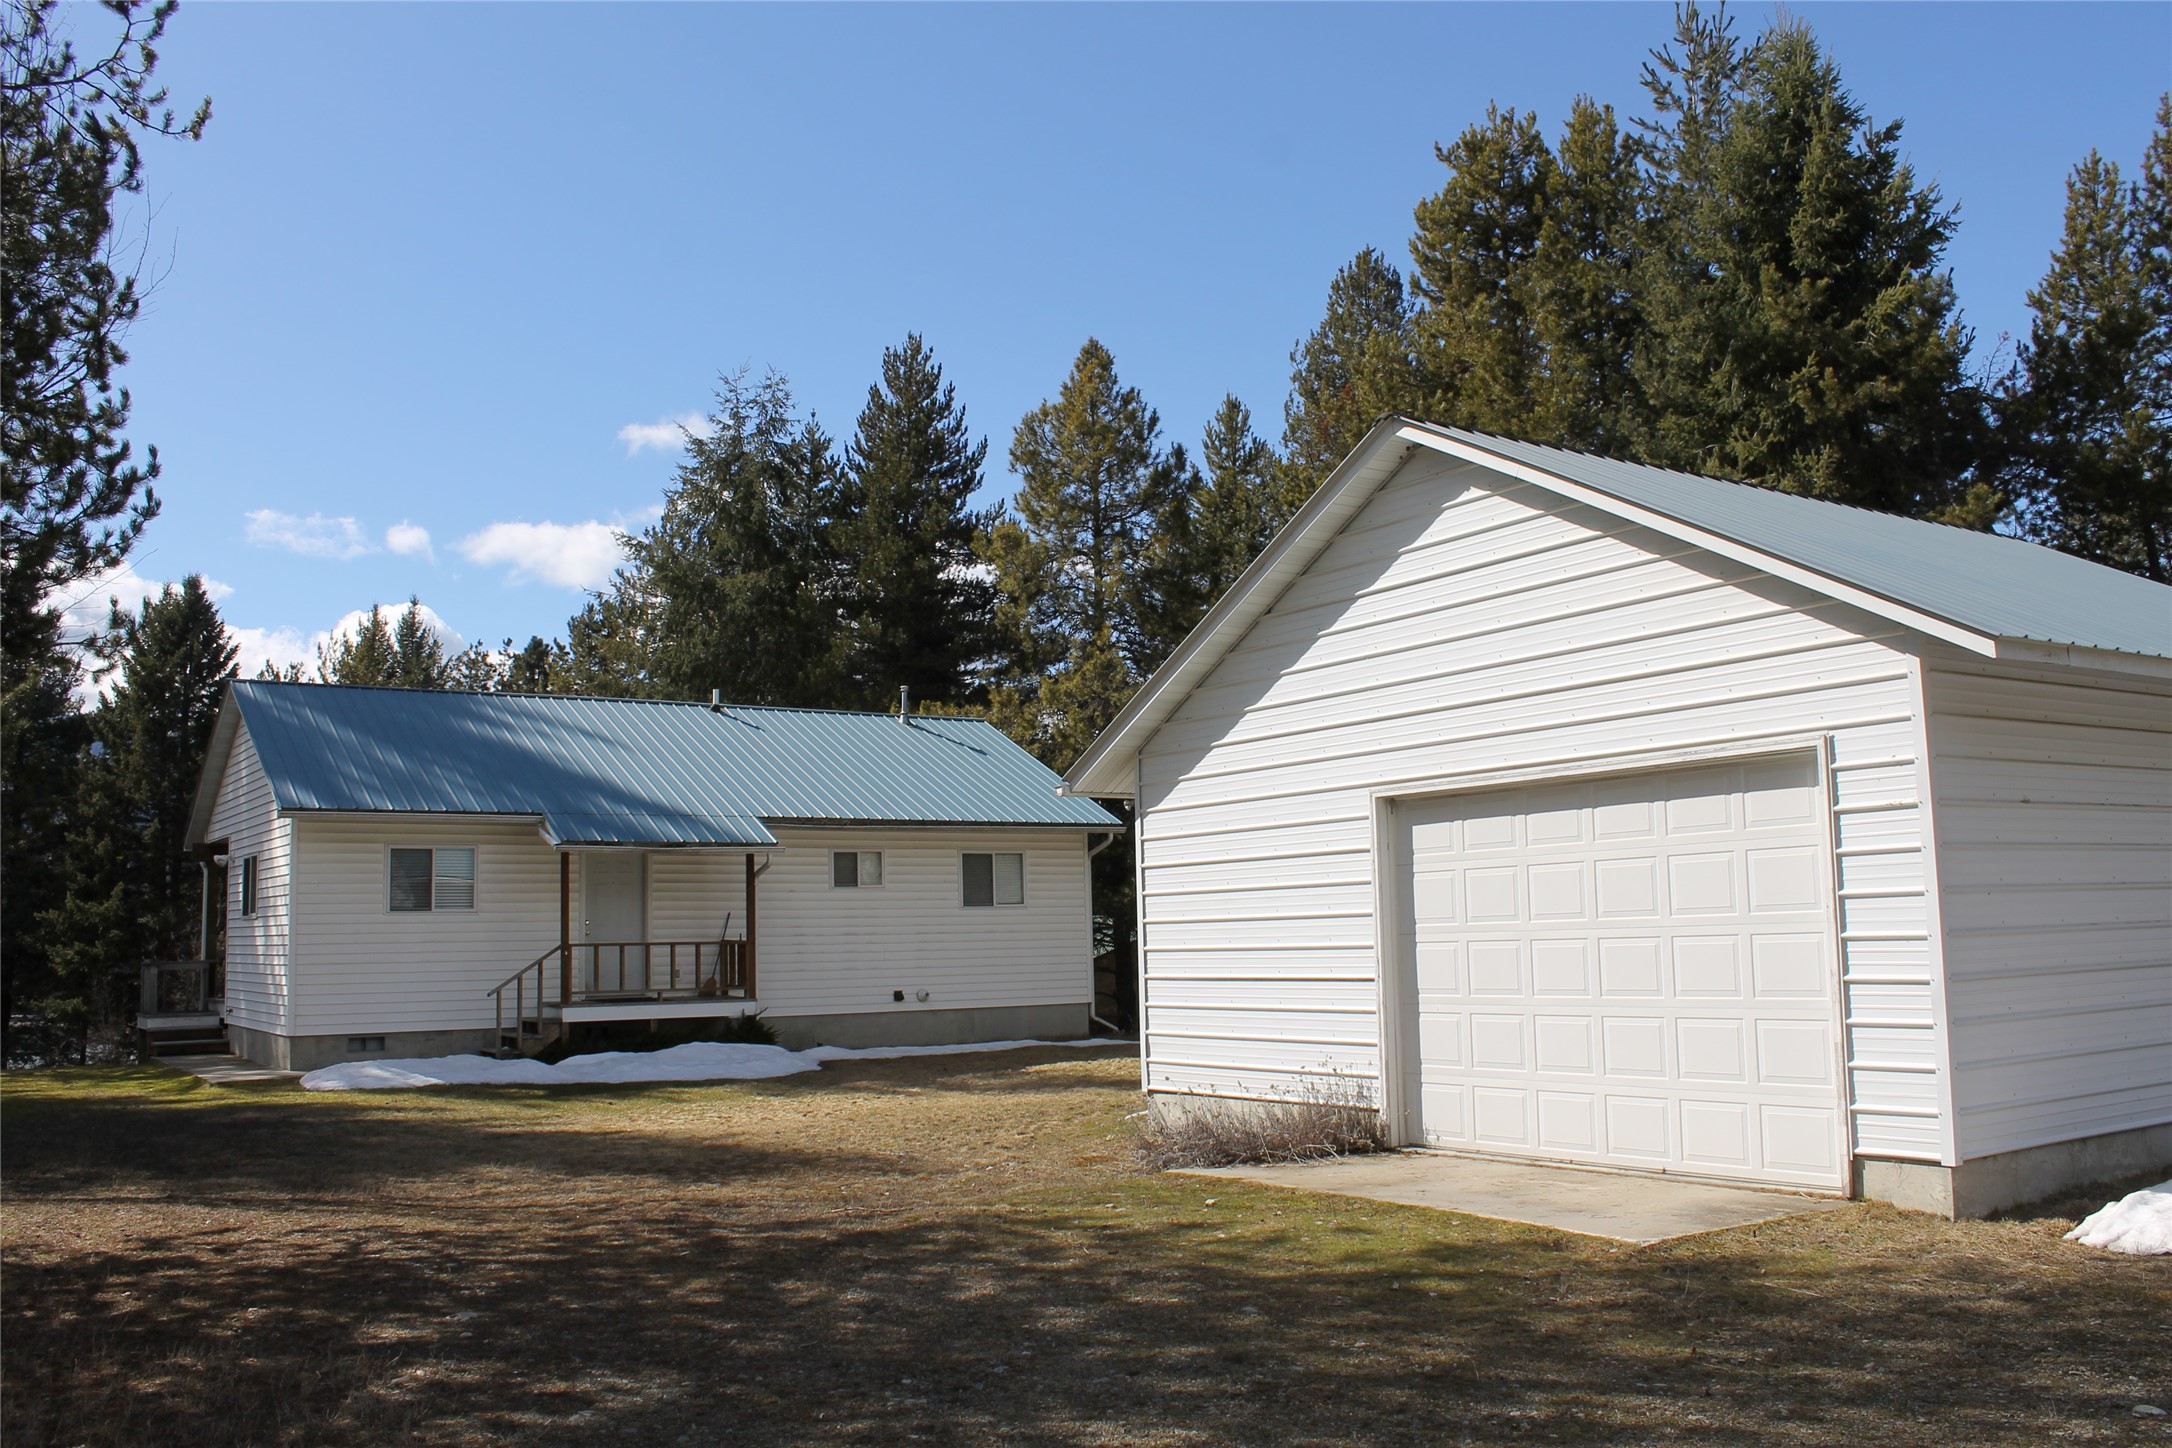 2 bedroom, 1 1/2 bath home with unfinished basement on .49 acres with Avista Frontage on the Noxon Reservoir.
The unfinished basement with exterior access has a 1/2 bath.  Oversized Single car garage.